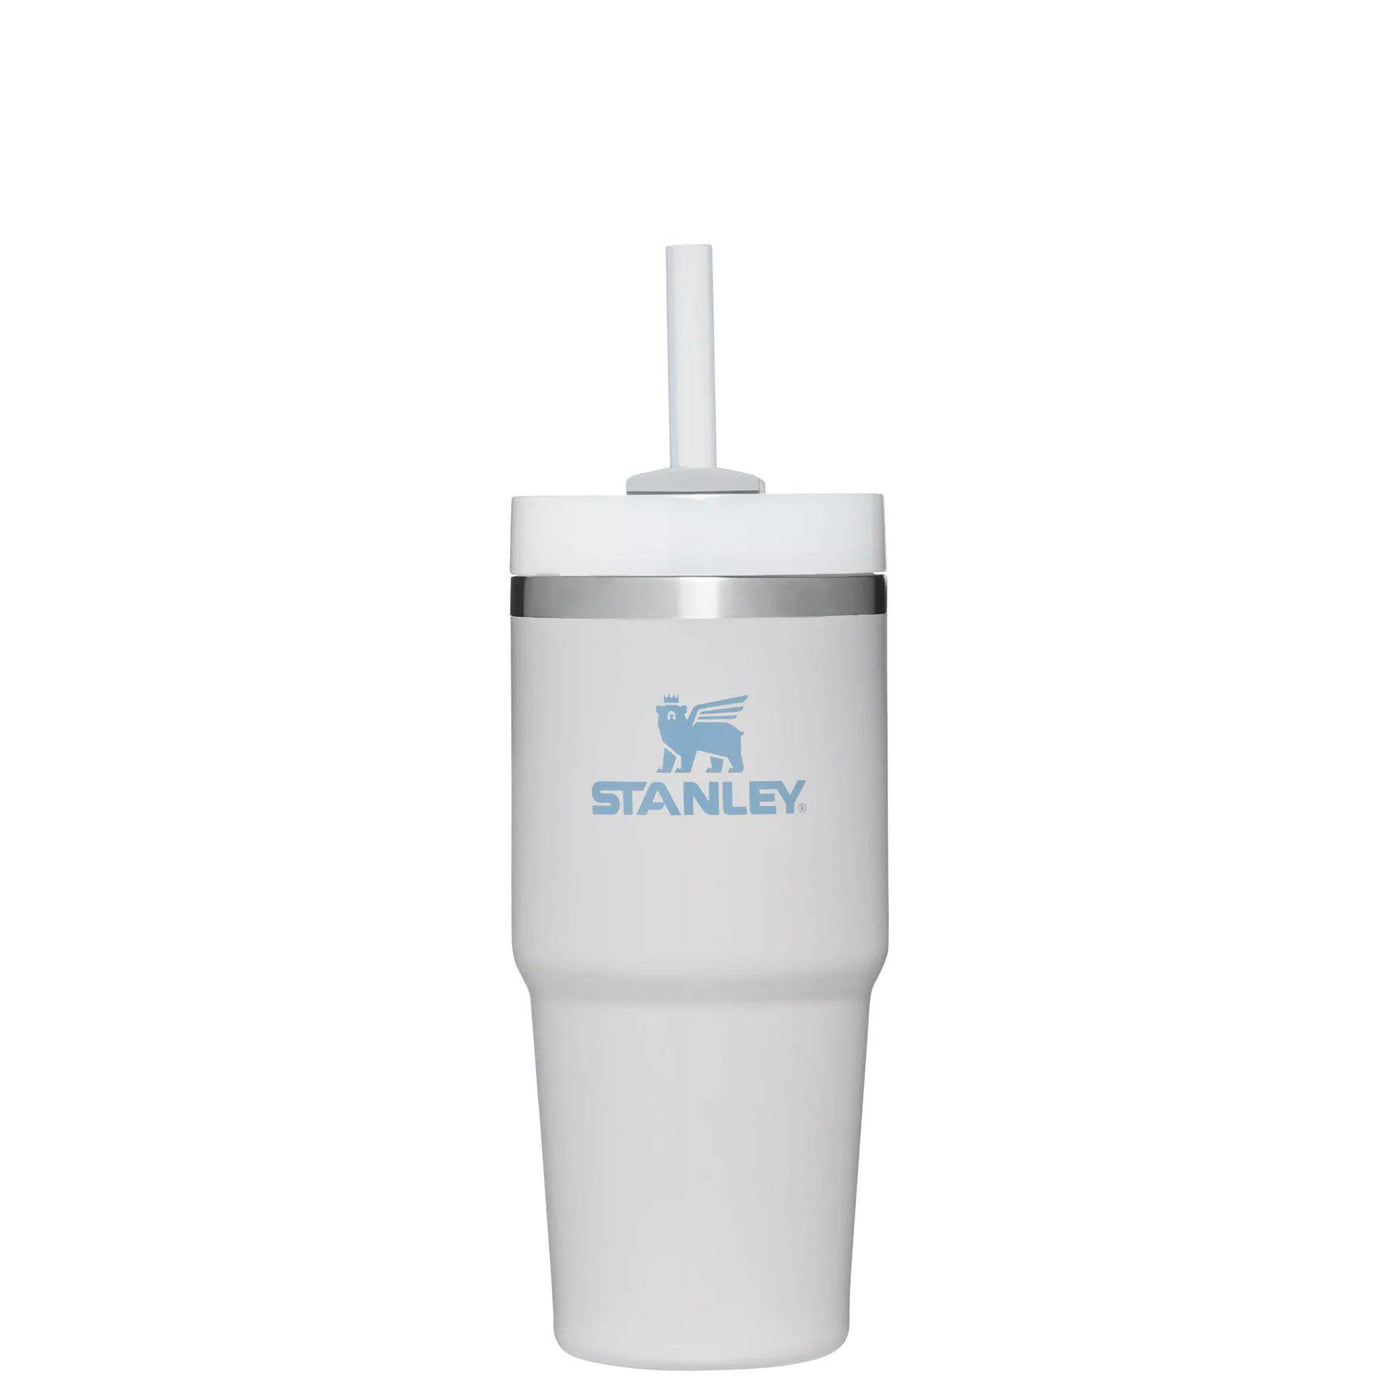 Stanley The Quencher H2.O Flowstate 14oz Tumbler 